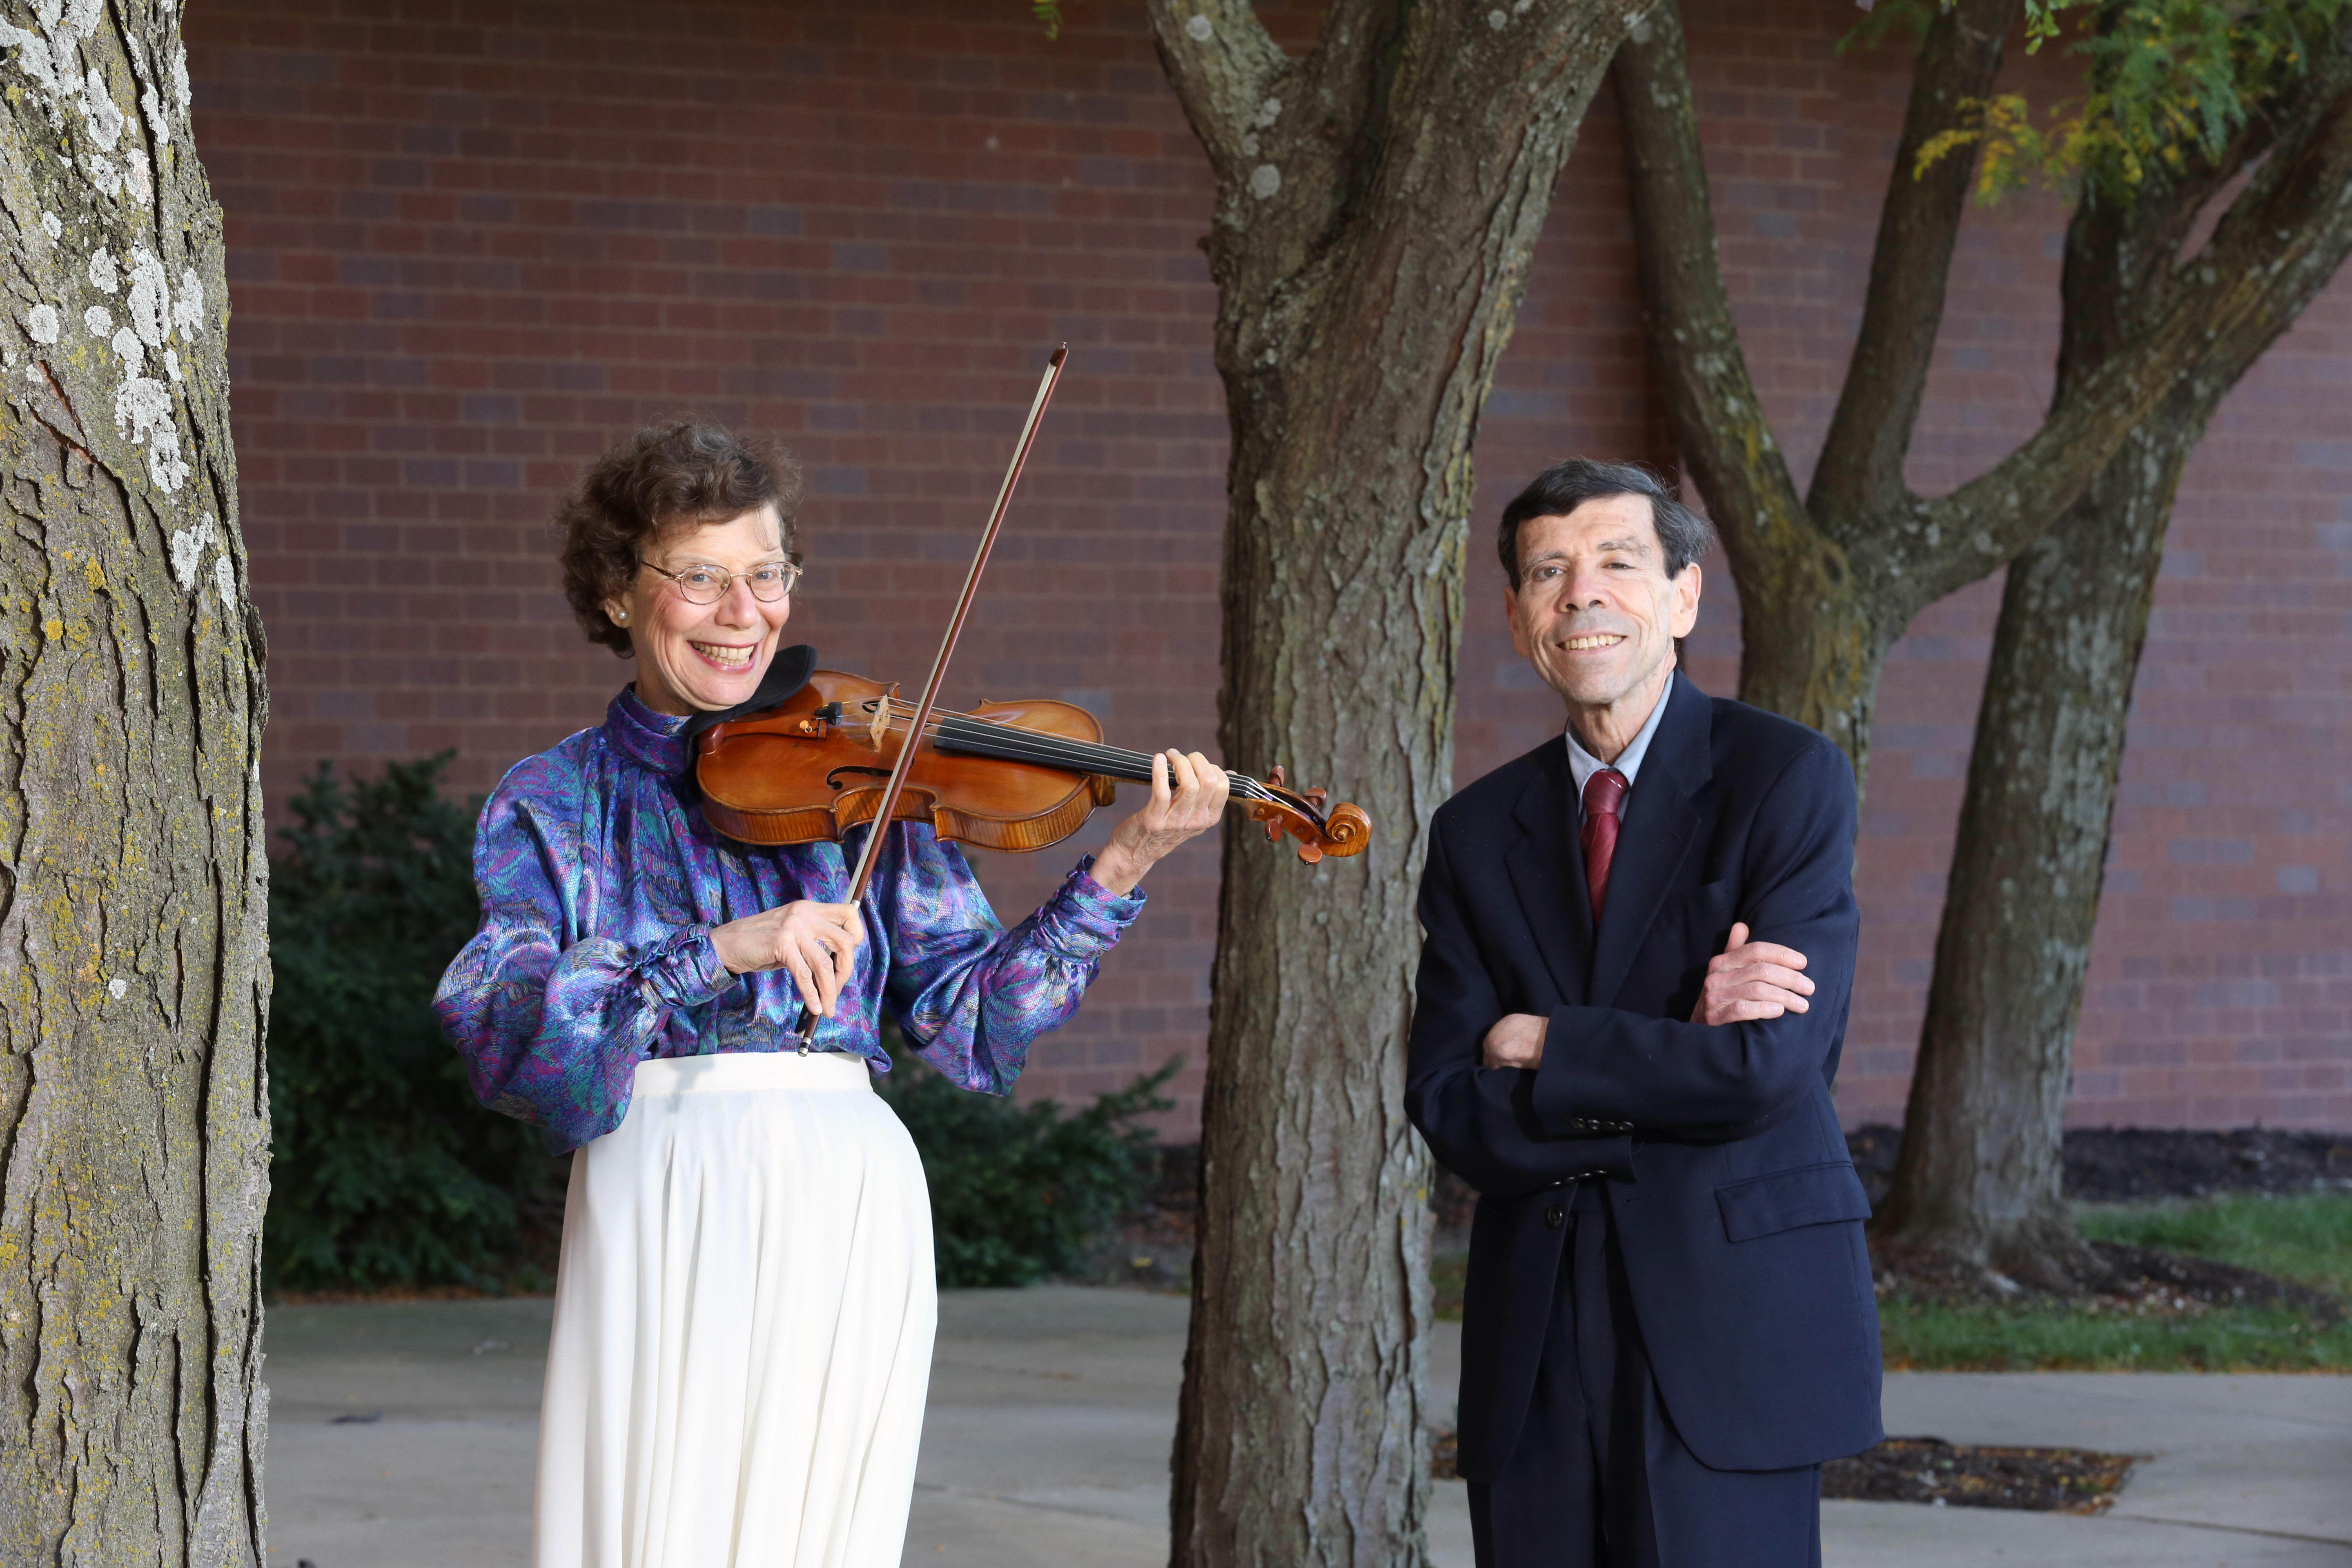 Susan (violin) and William Goldenberg (piano) of the Goldenberg Duo.